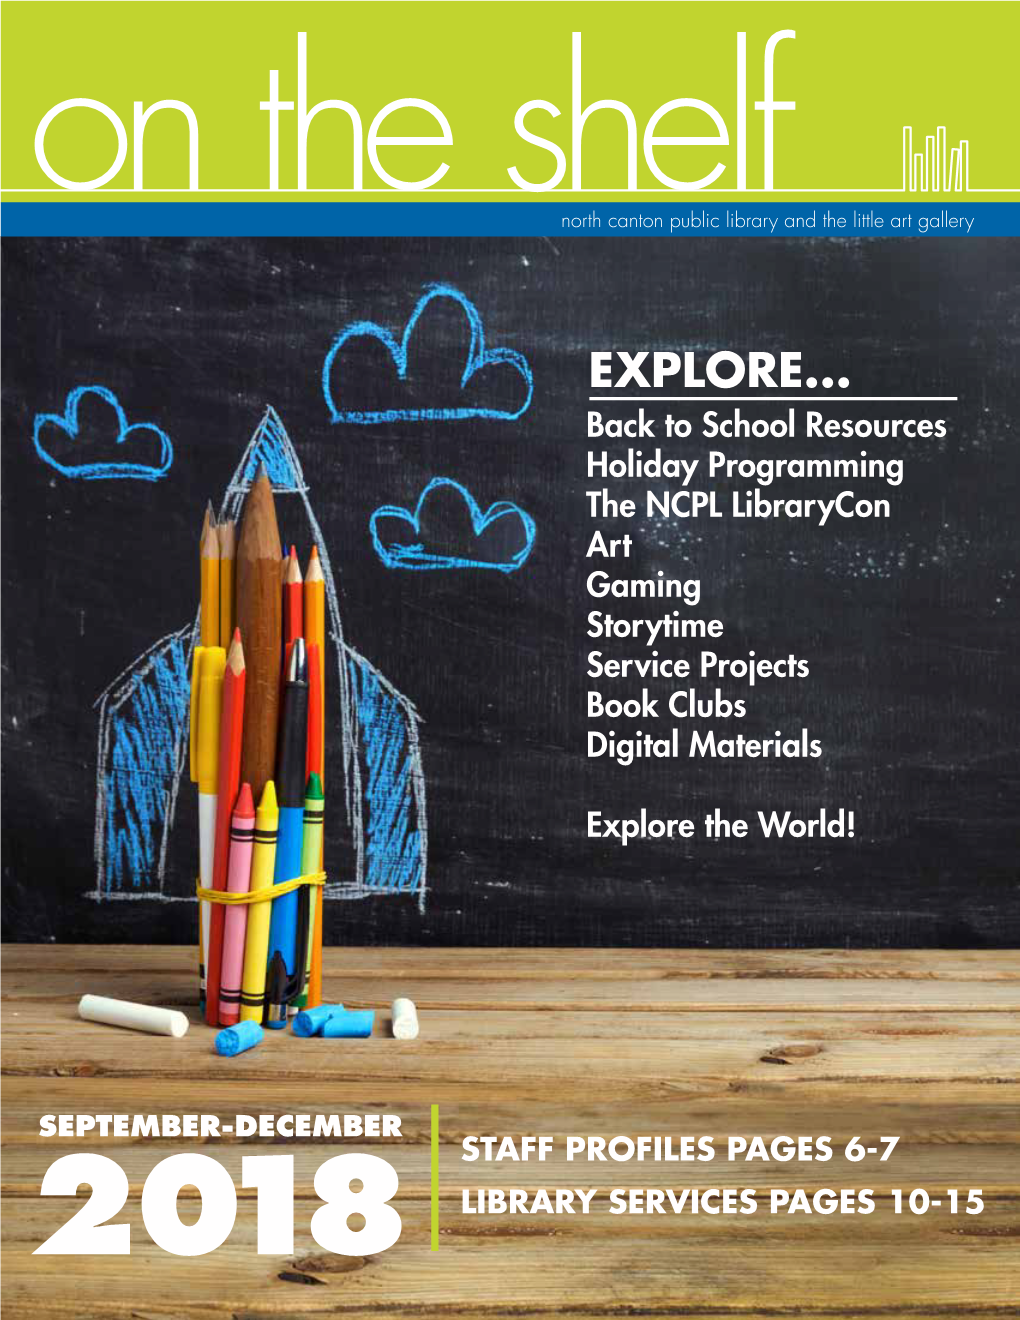 EXPLORE... Back to School Resources Holiday Programming the NCPL Librarycon Art Gaming Storytime Service Projects Book Clubs Digital Materials